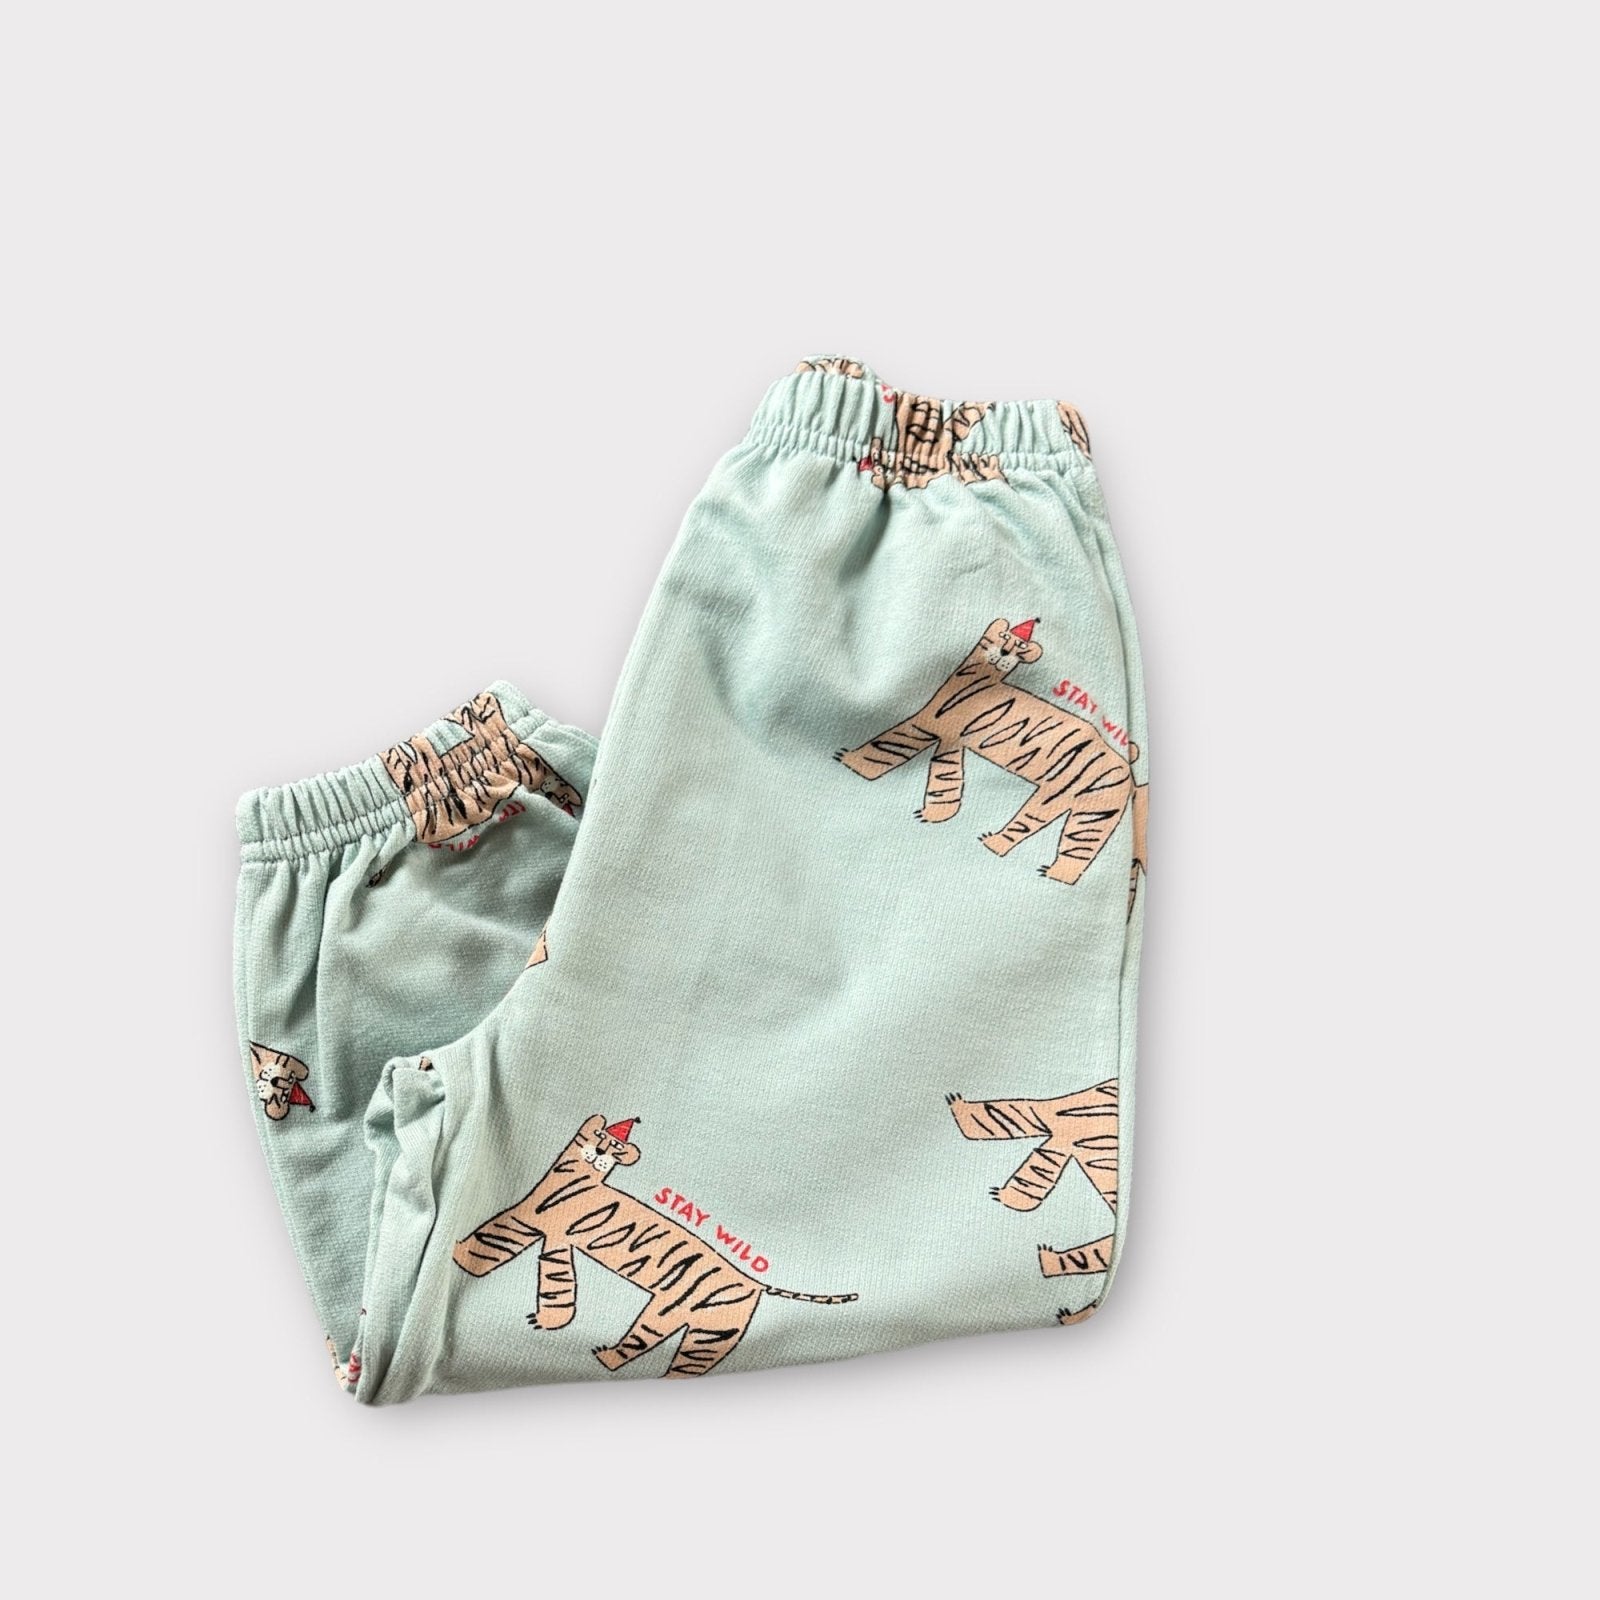 Stay Wild Pants find Stylish Fashion for Little People- at Little Foxx Concept Store